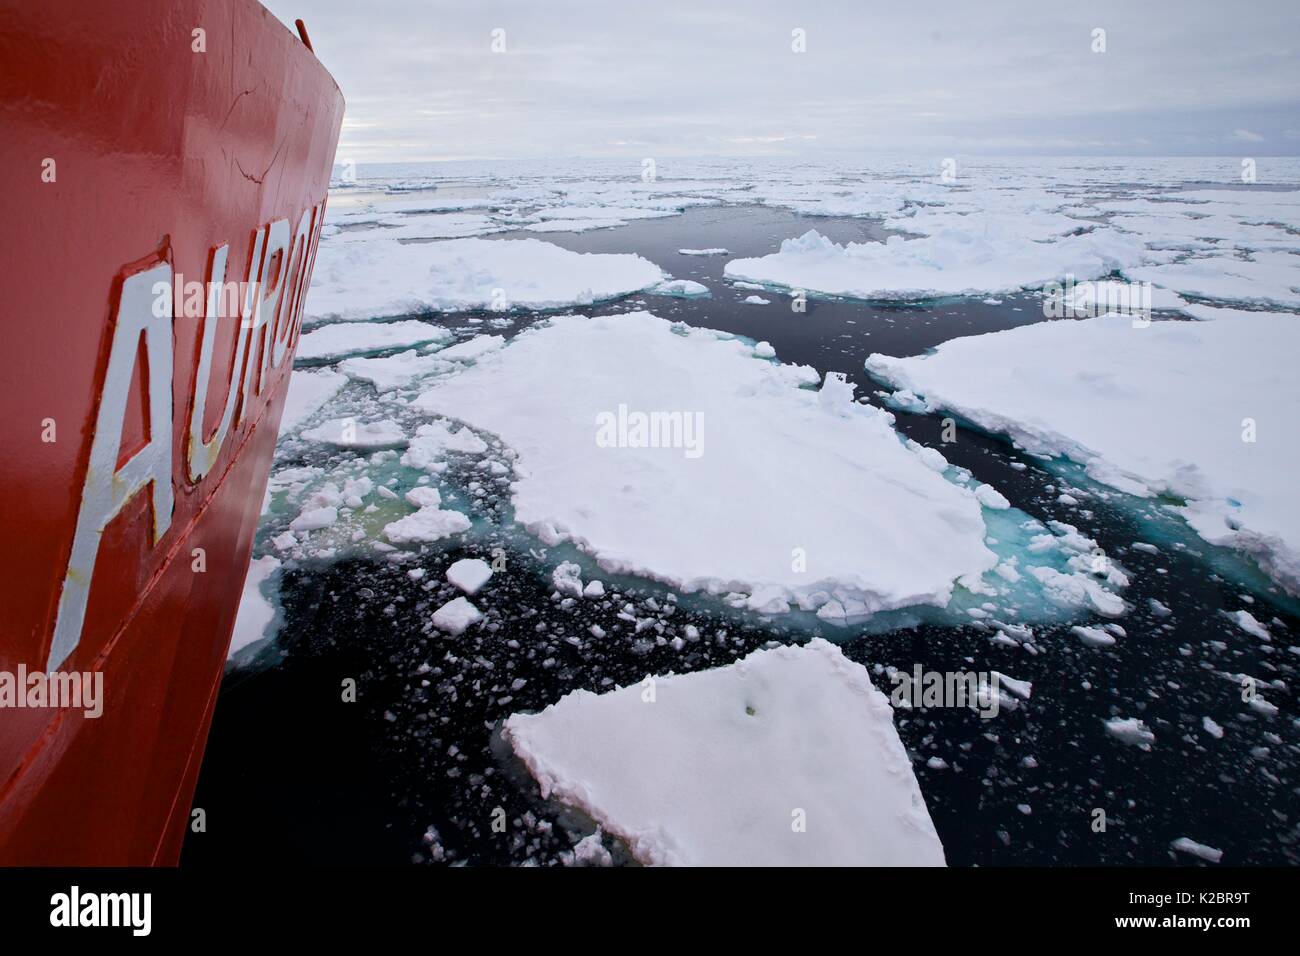 Abstract view of the bow of the icebreaker 'Aurora Australis', Antarctica. All non-editorial uses must be cleared individually. Stock Photo